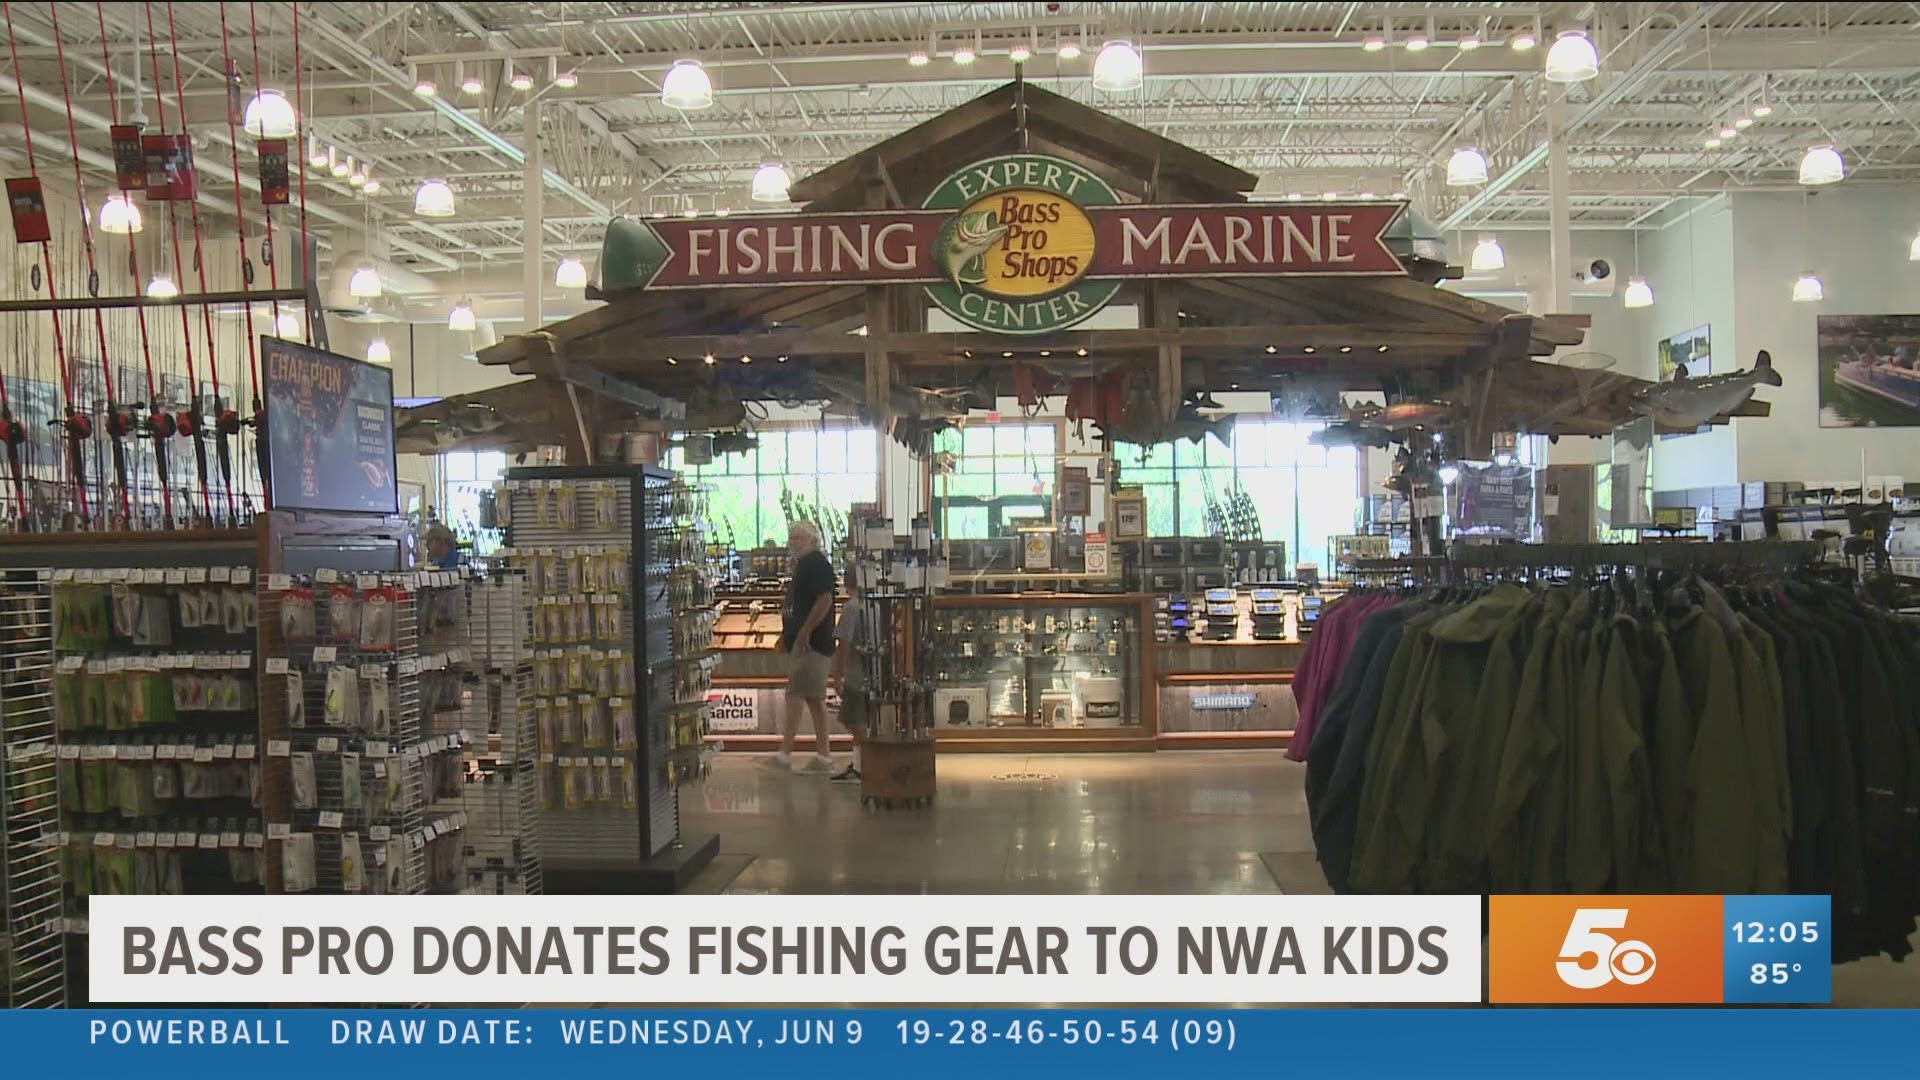 They are hoping to encourage kids to put the screens down and get outside to fish.